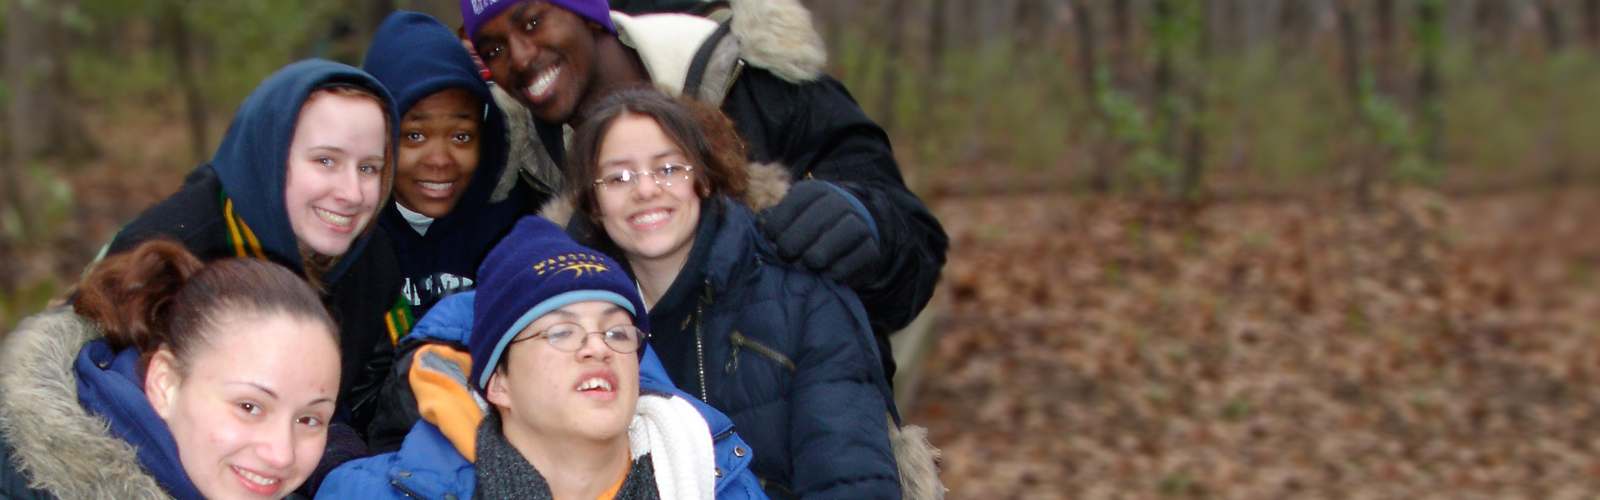 Group of 5 smiling adolescents in winter gear outside with leaves on the ground.